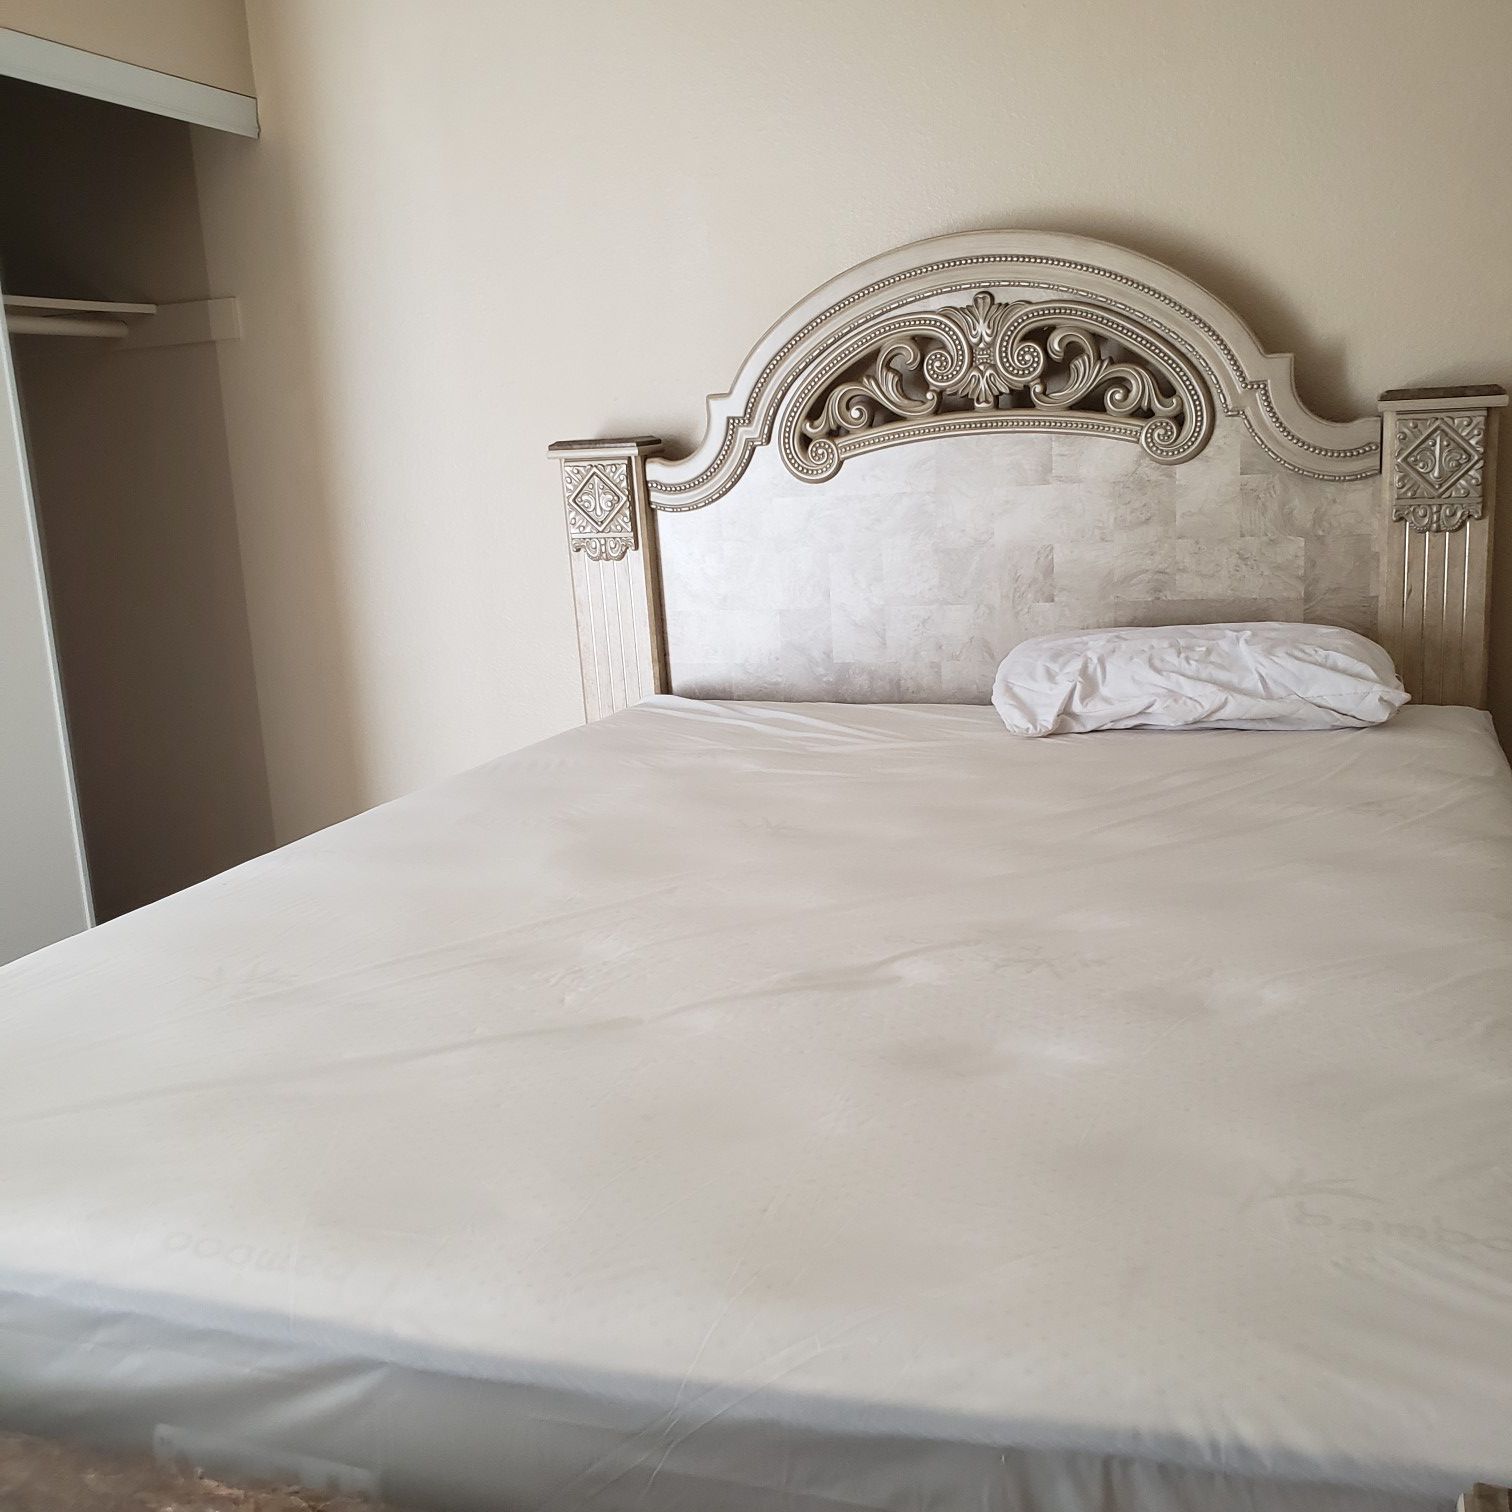 Queen size bed for sale $1500